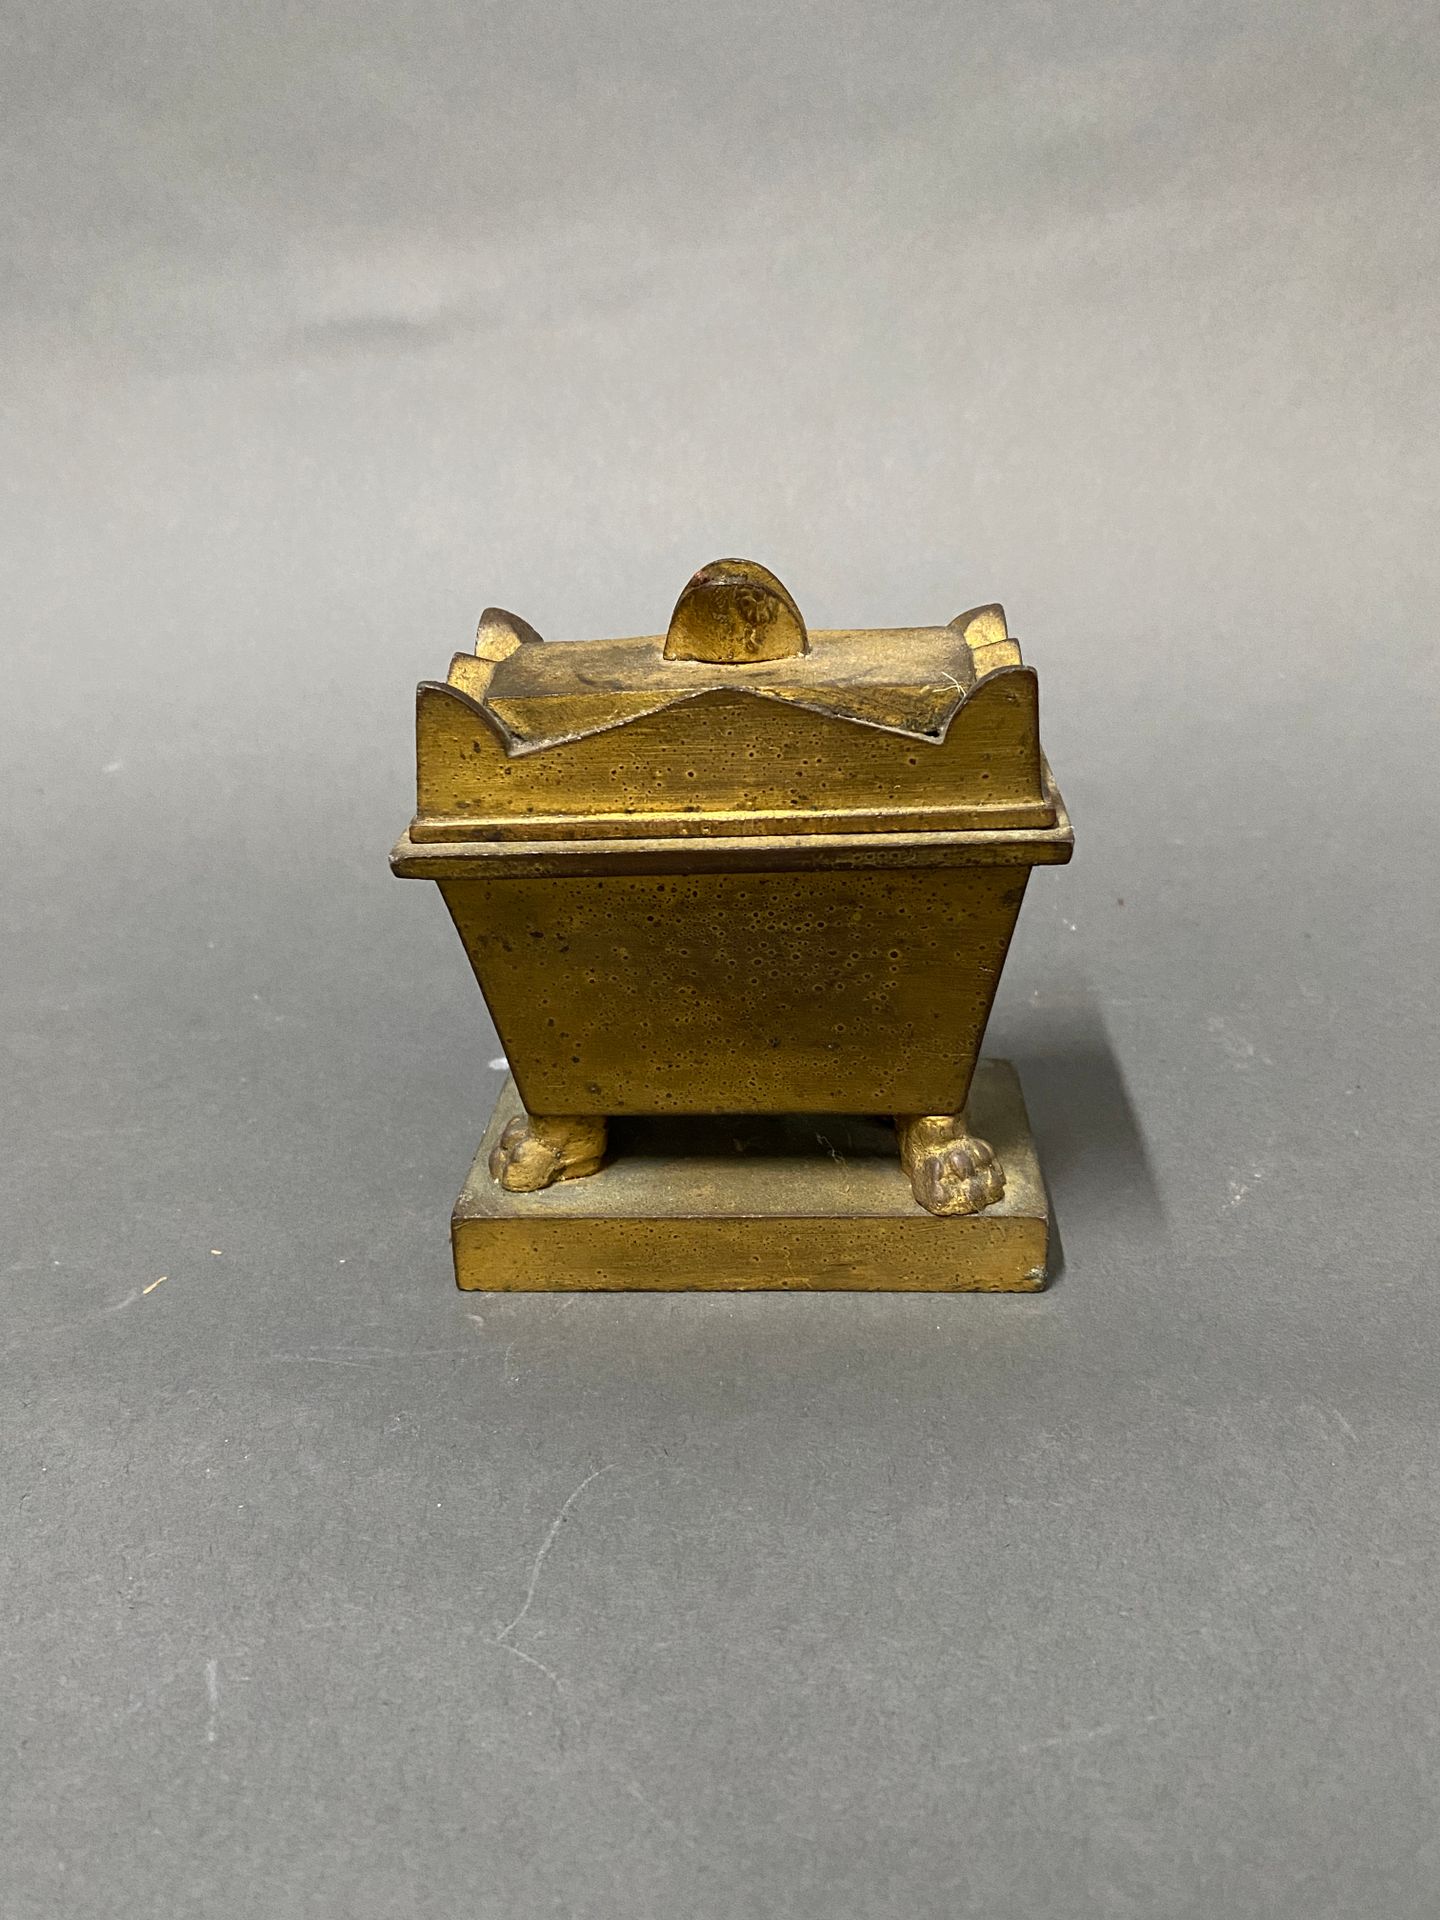 Null Bronze inkwell "tomb of Napoleon

H : 10 - L : 9 - W : 5,5 cm

Missing the &hellip;